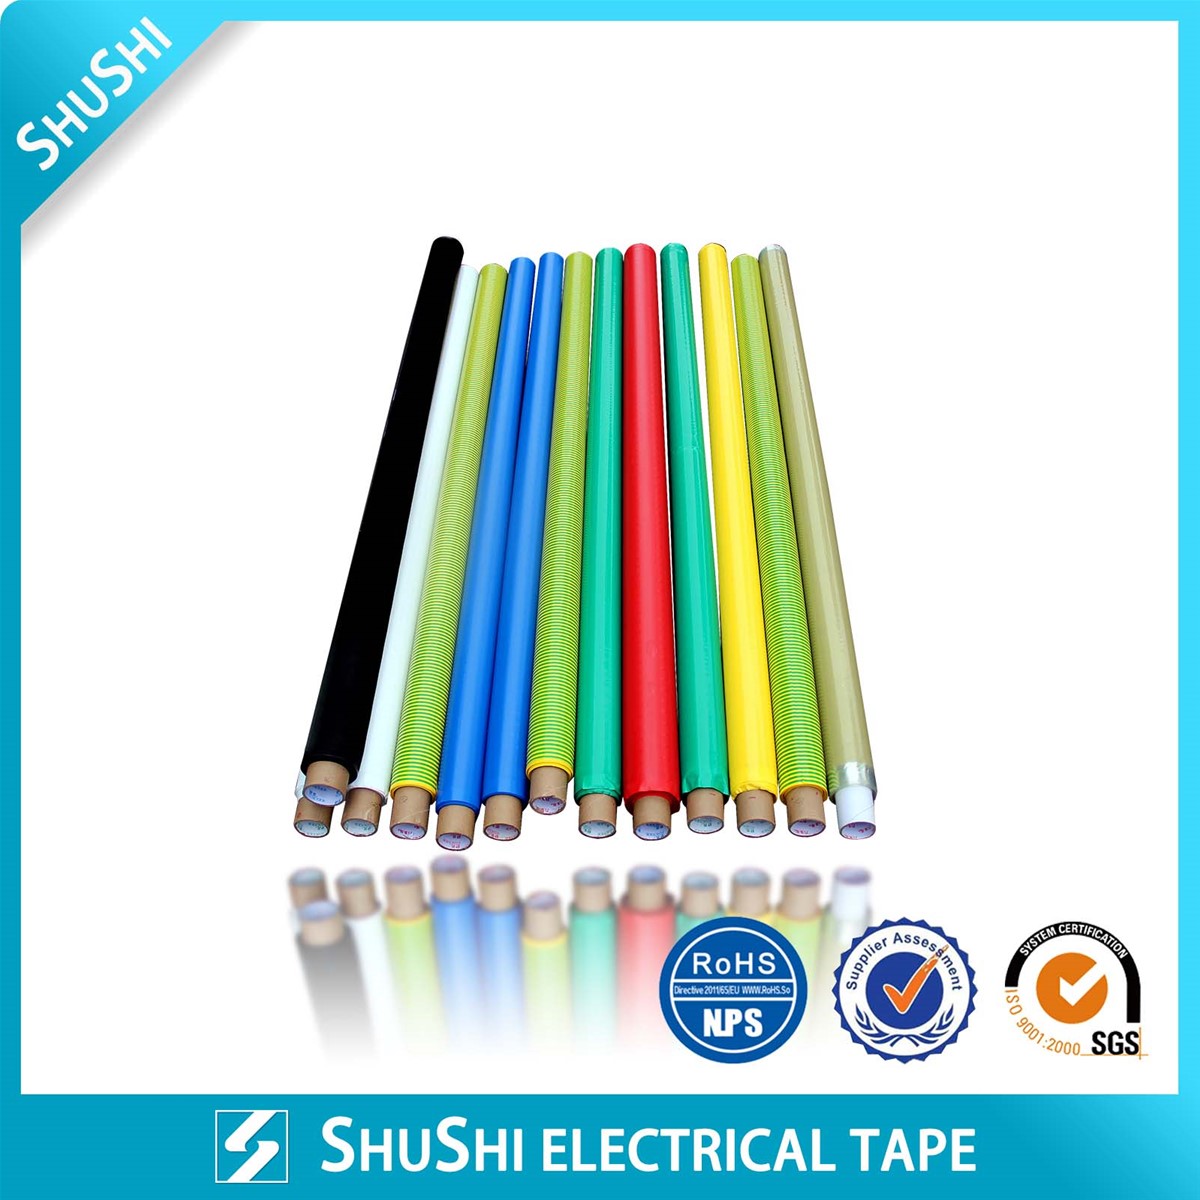 PVC adhesive tape jumbo roll for electrical use